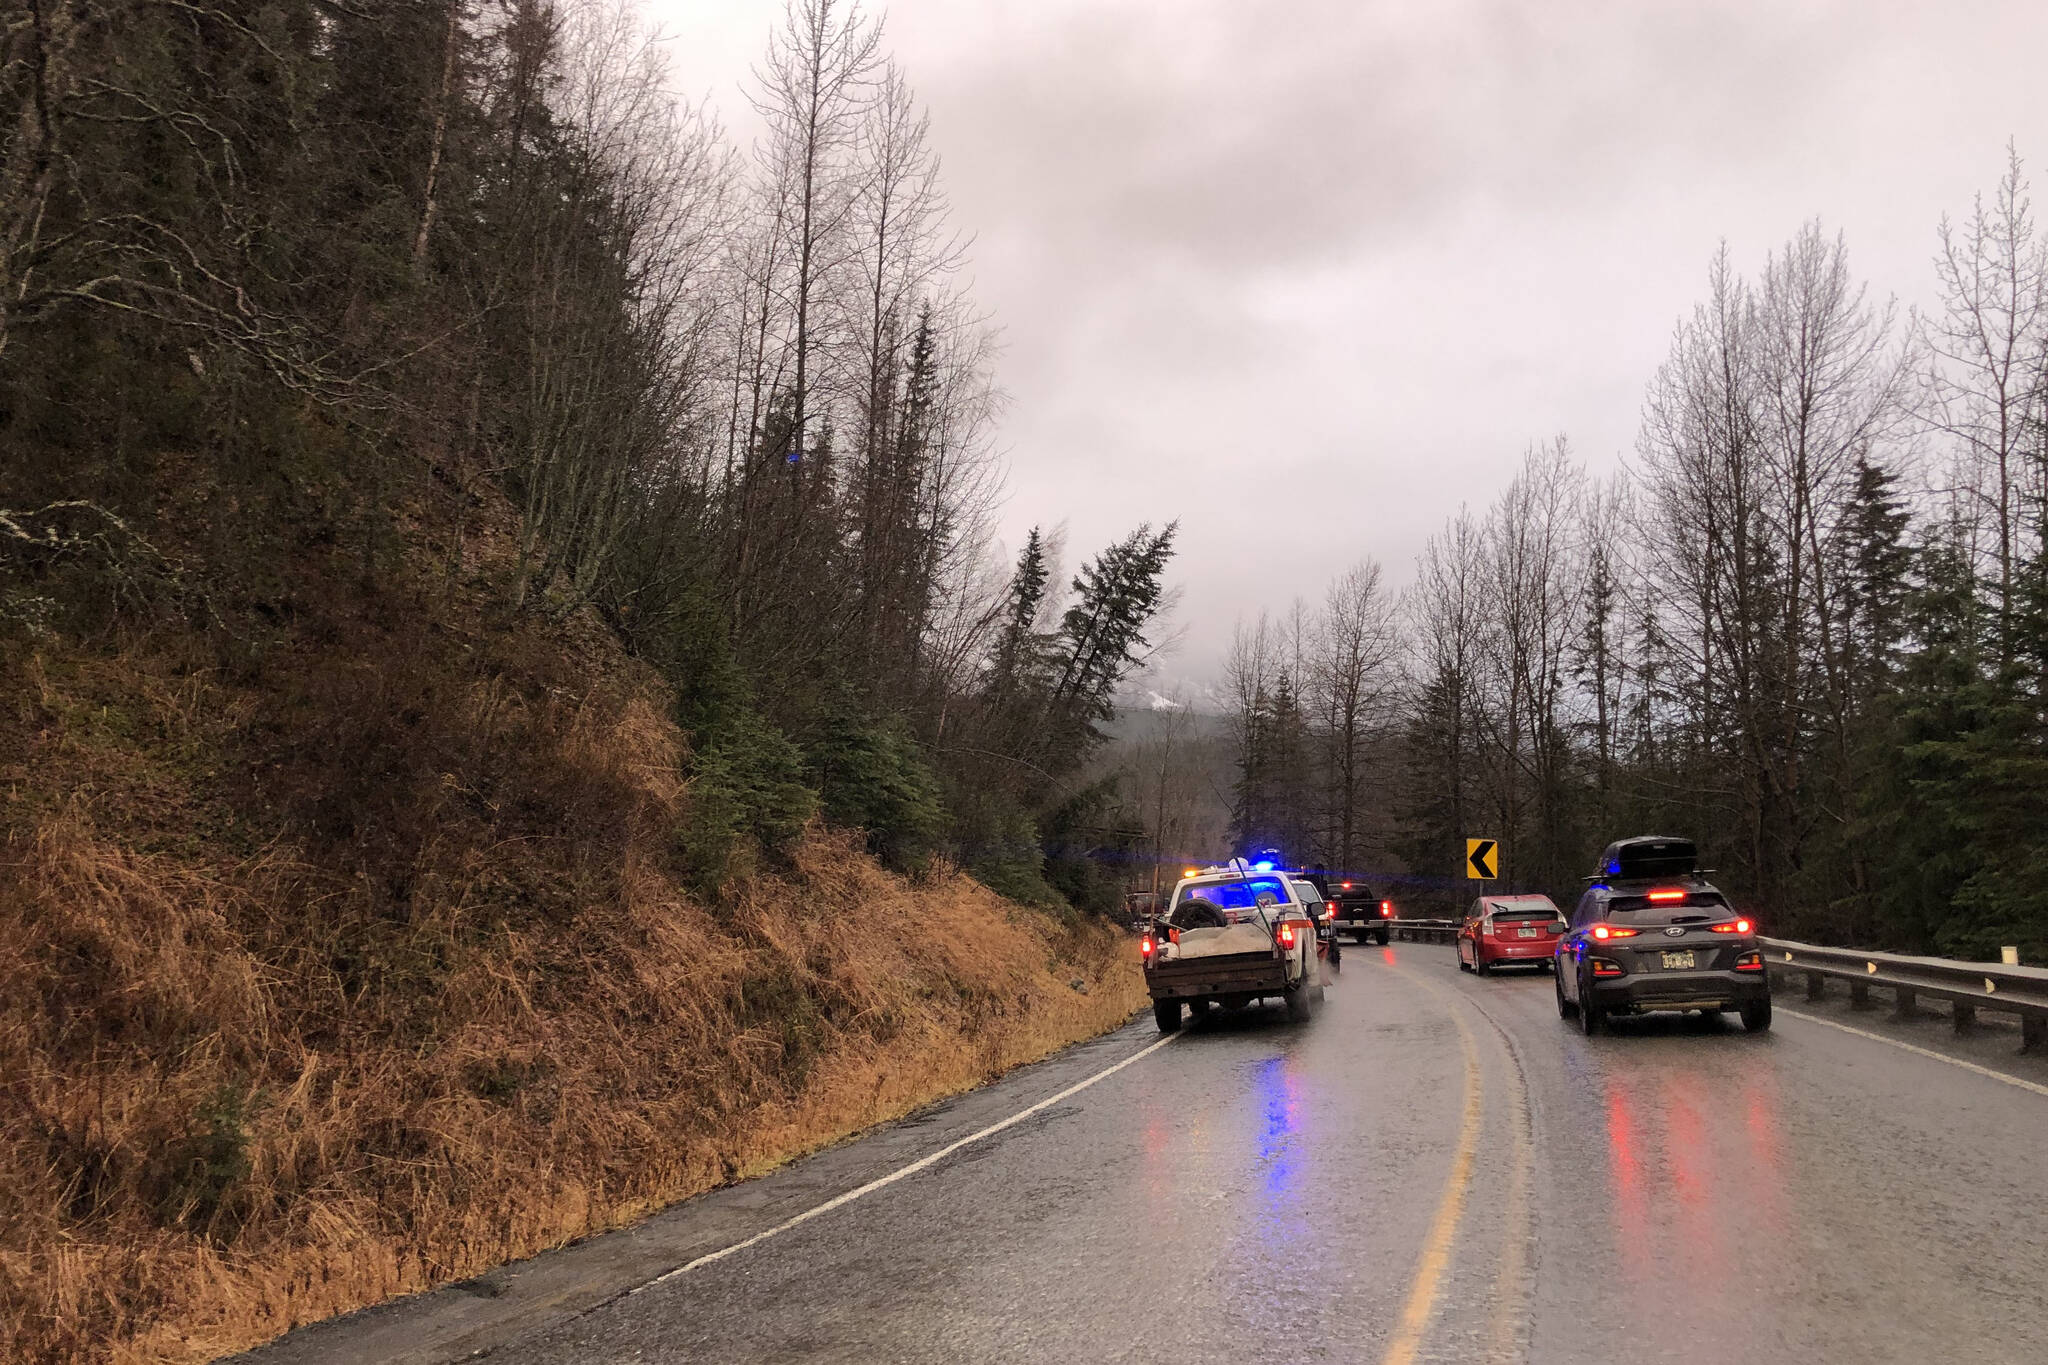 Cars wait on Monday, Nov. 1, 2021 while debris is cleared on a section of the Sterling Highway that was blocked by a landslide that took place on Sunday, Oct. 31, 2021, near Cooper Landing, Alaska. (Camille Botello/Peninsula Clarion)